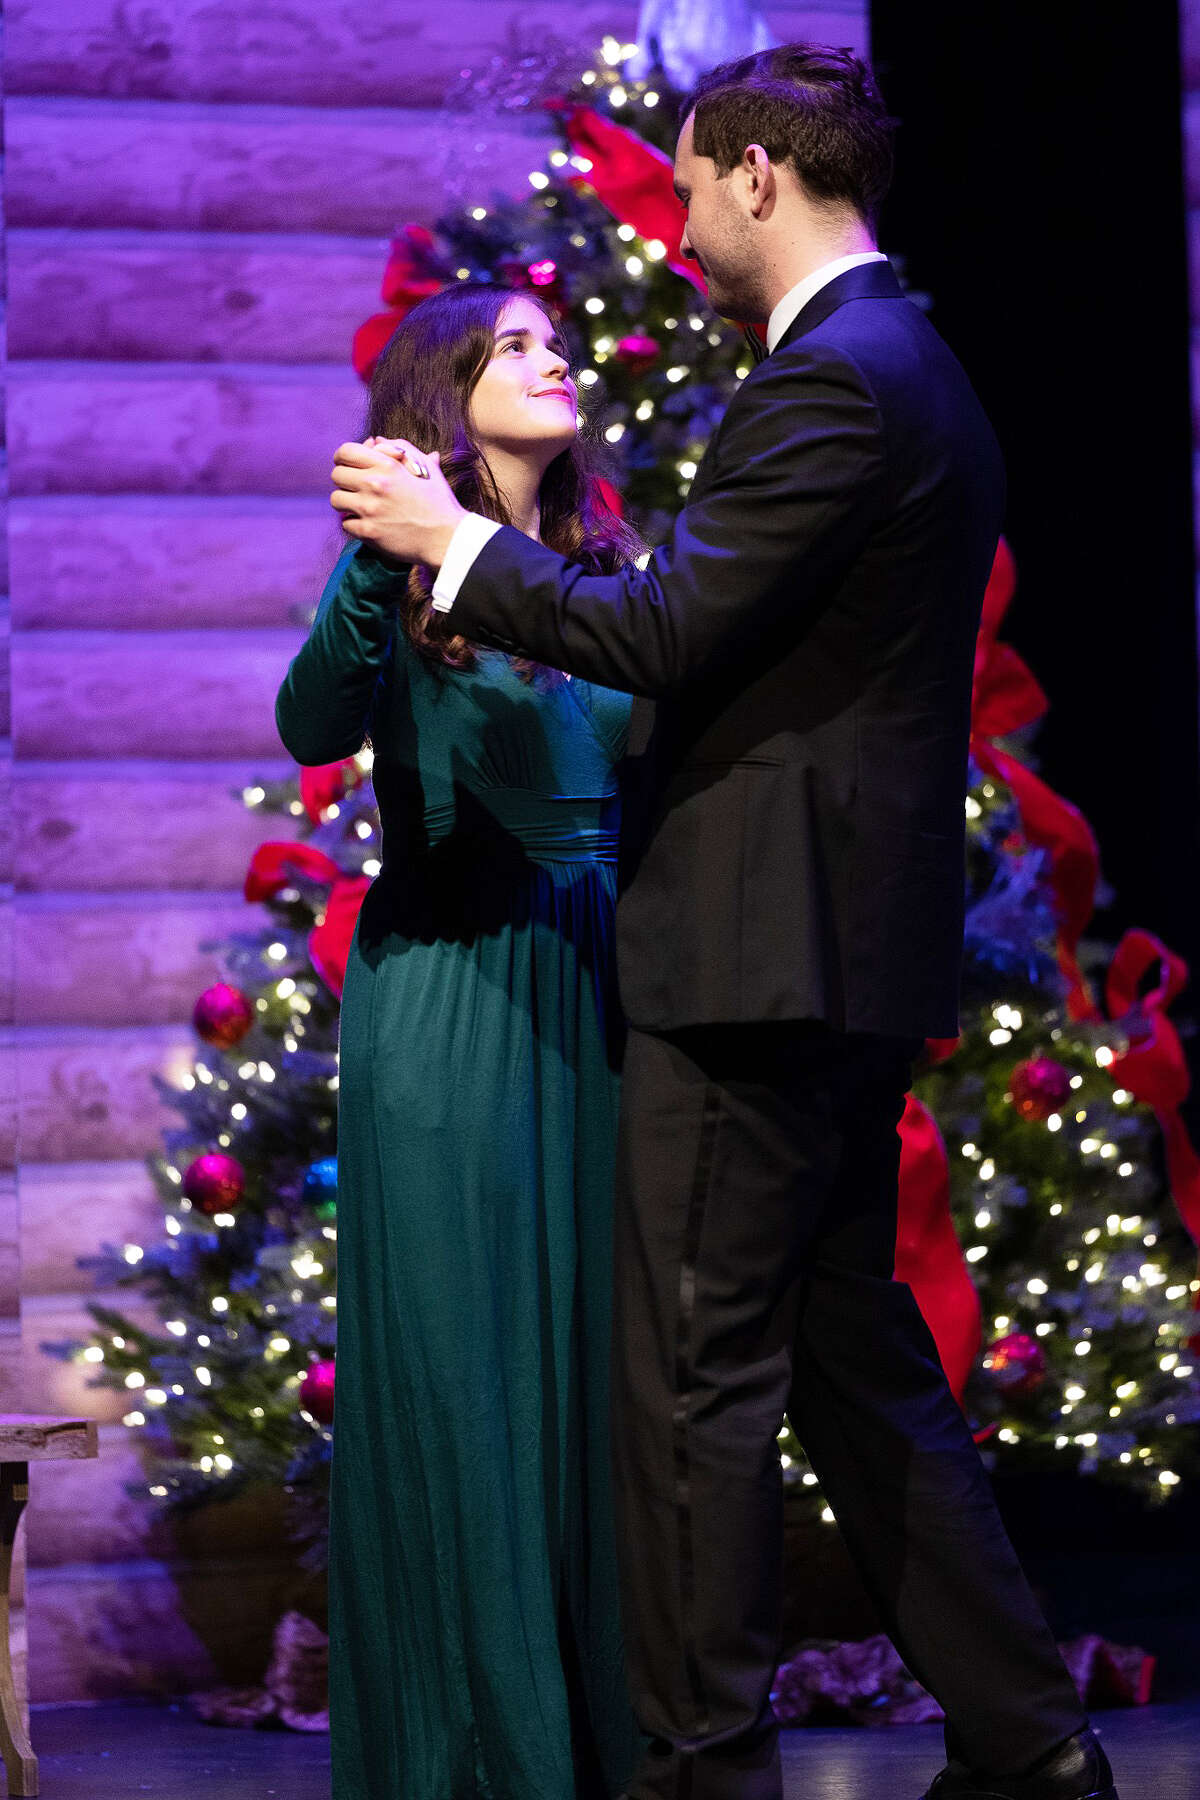 Opera Leggera soloists Hannah Holloway and Christopher Auchter dance to the beloved Christmas favorite "White Christmas" in last year's production, “Christmas with Opera Leggera and Friends.”